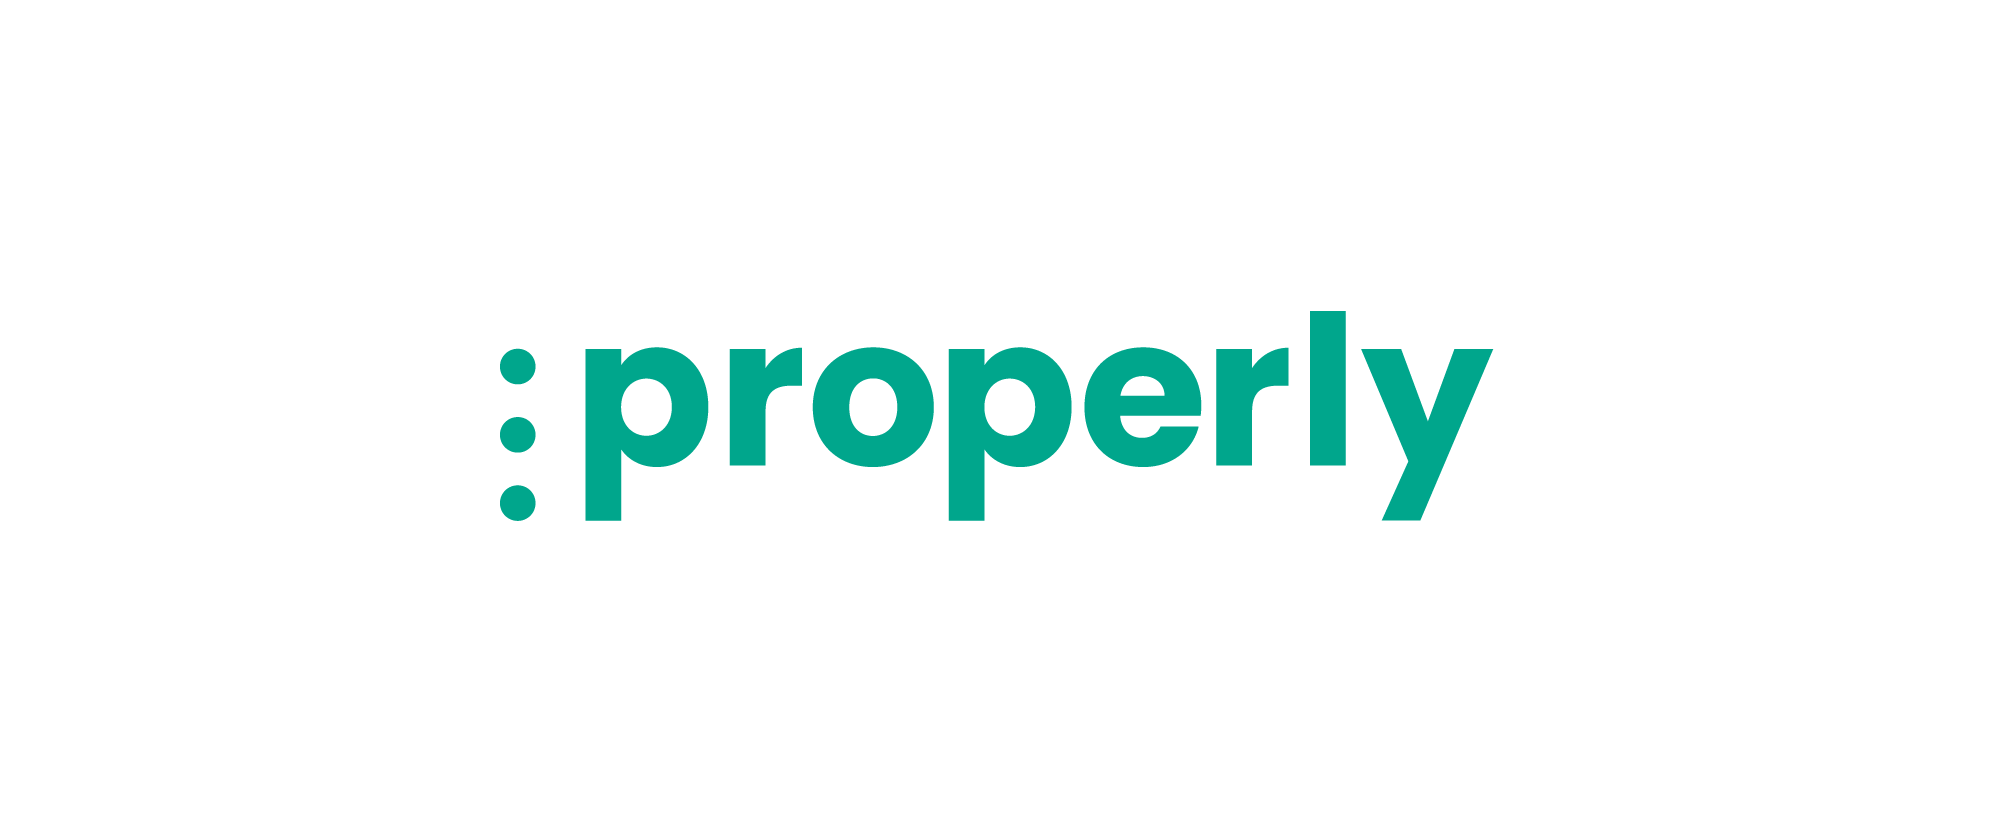 New Logo and Identity for Properly by Frank Collective